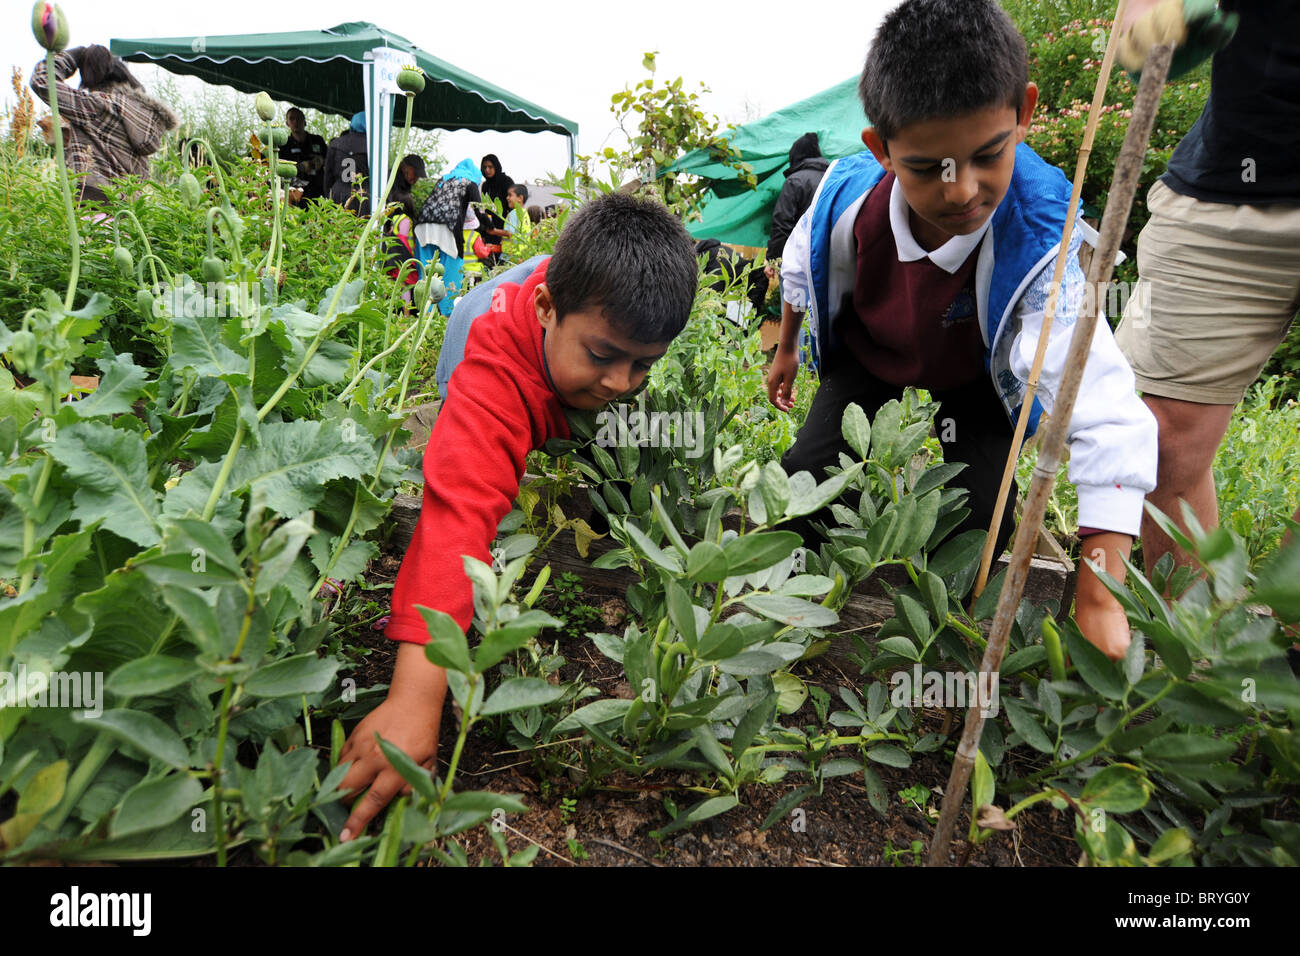 children visit a local inner city allotment to learn about gardening and the environment, Bradford UK Stock Photo